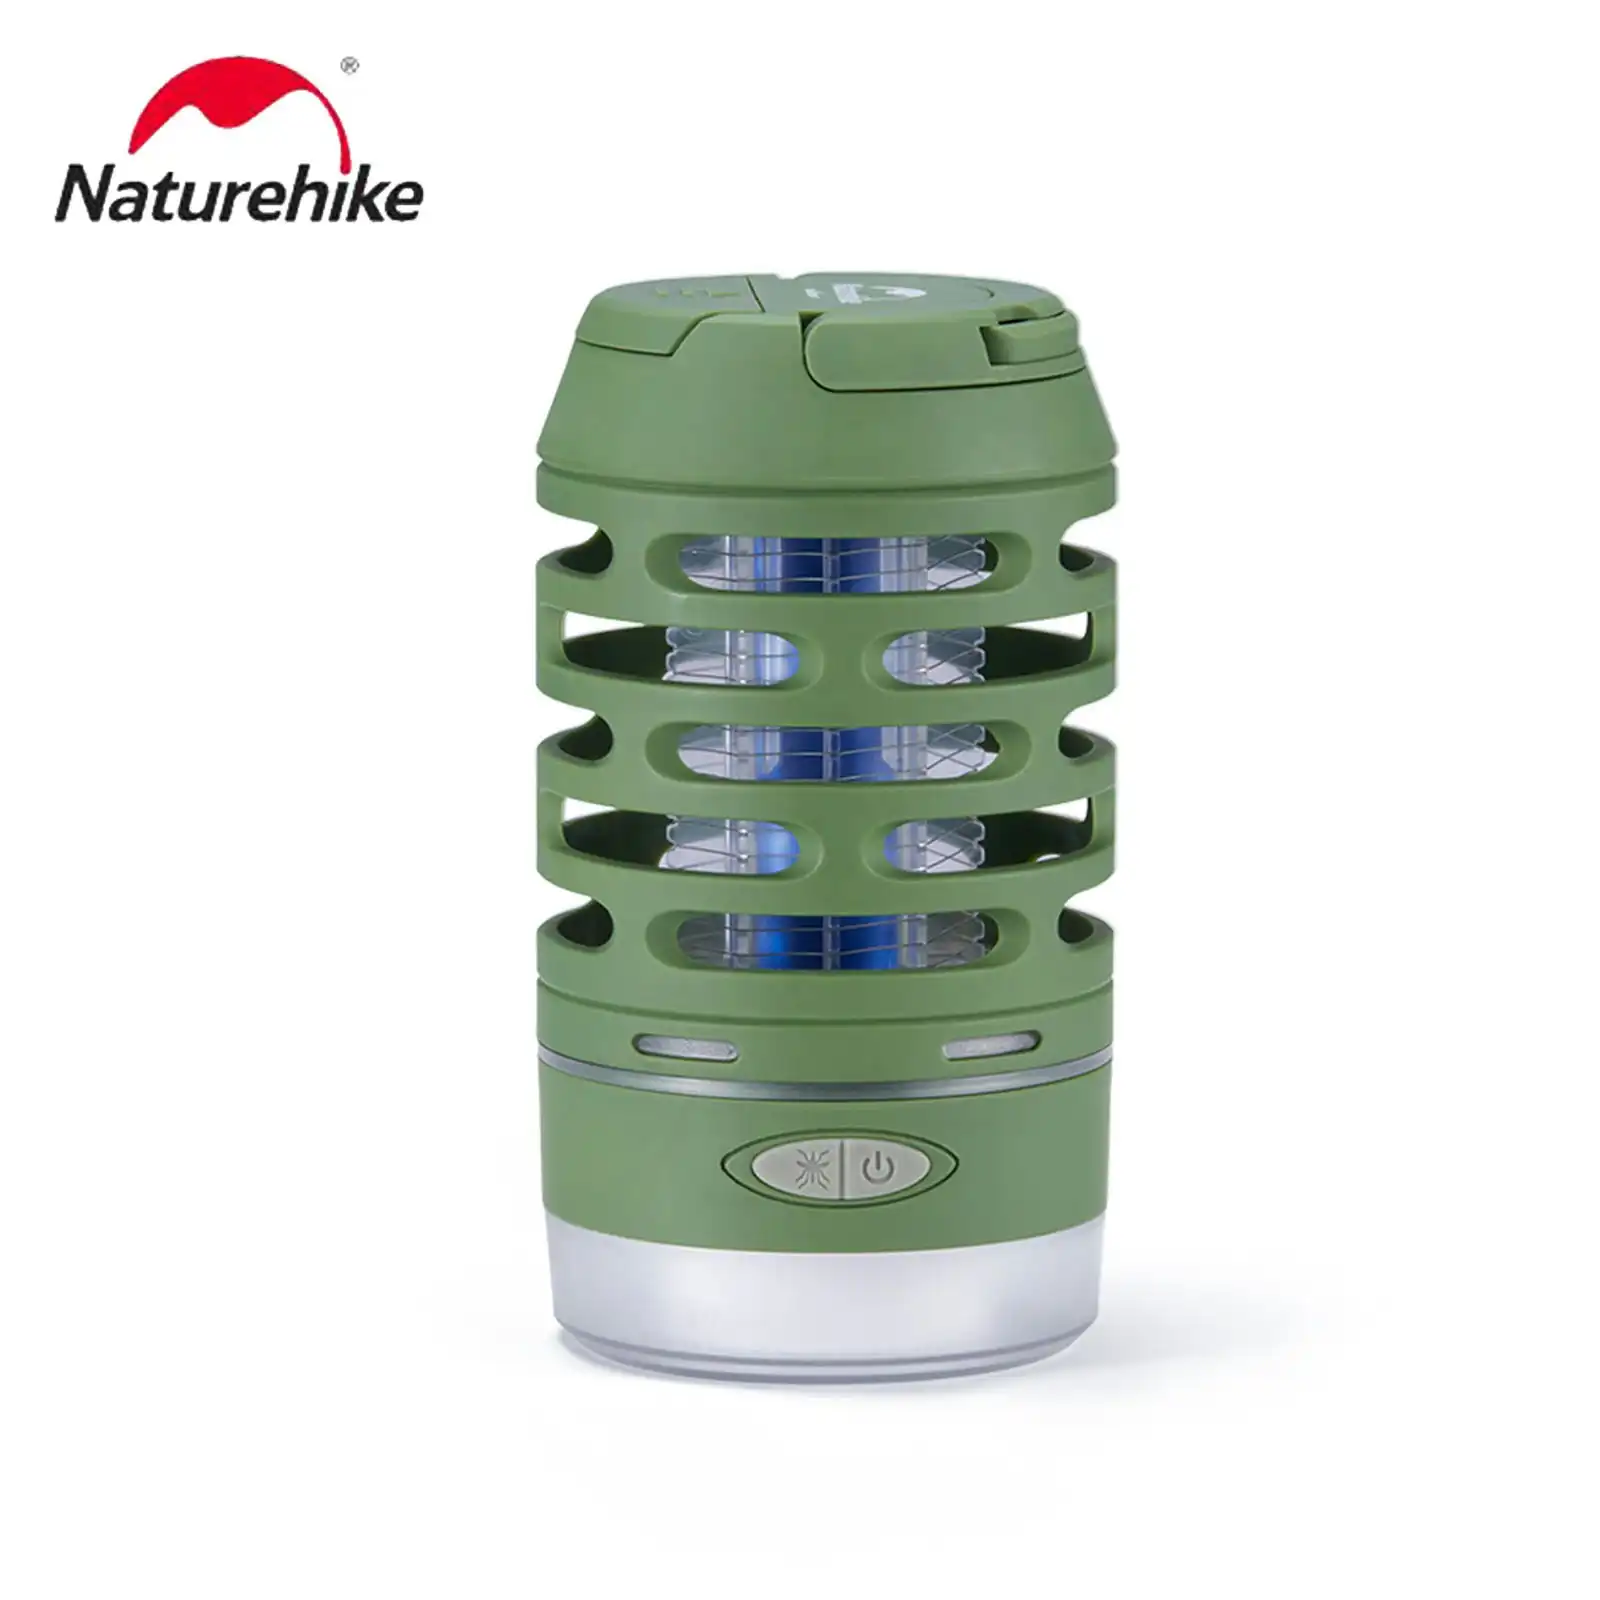 NatureHike Outdoor Electric Shock Mosquito Lamp Insect Repellent Waterproof Camping Lights Outdoor  - Green